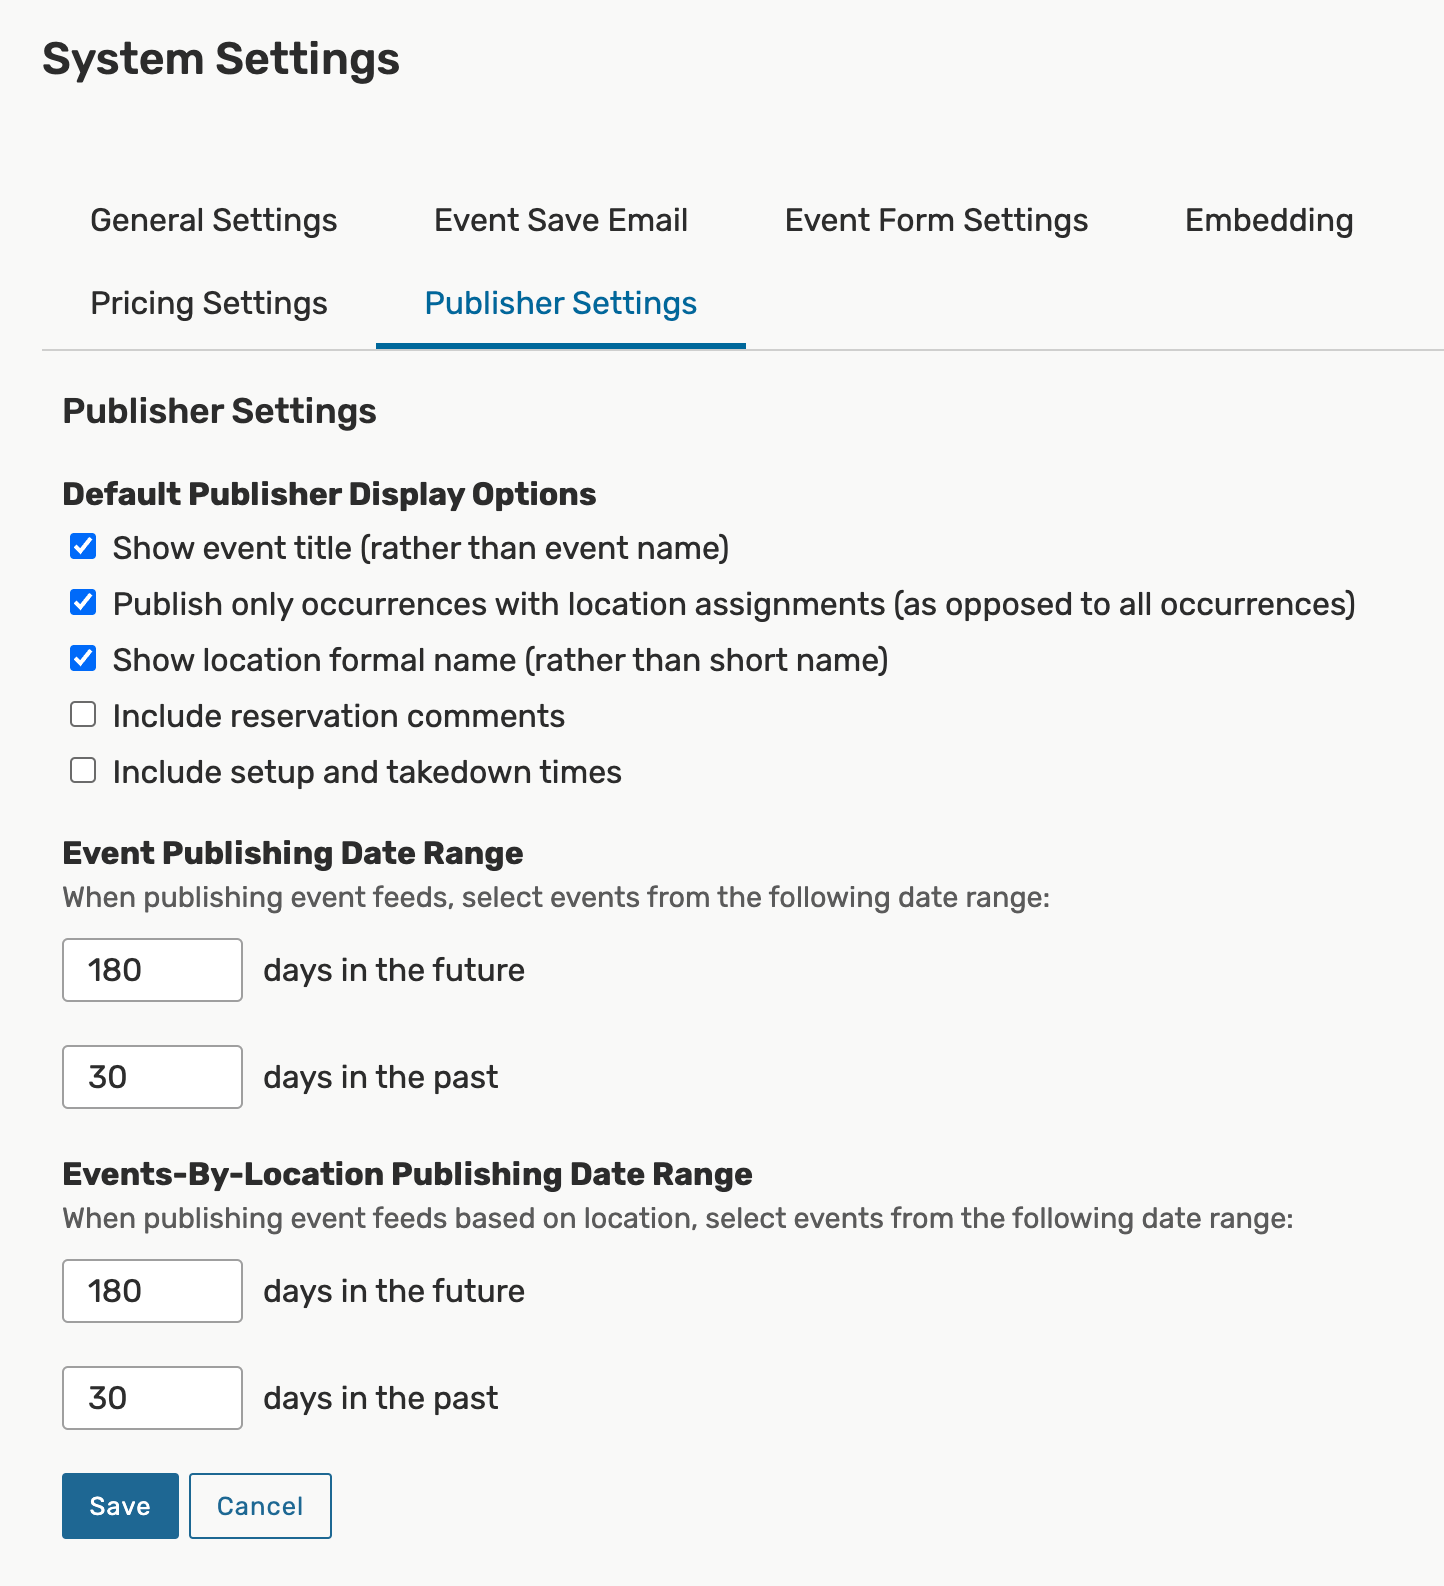 Publisher Settings can be updated in the 25Live System Settings.